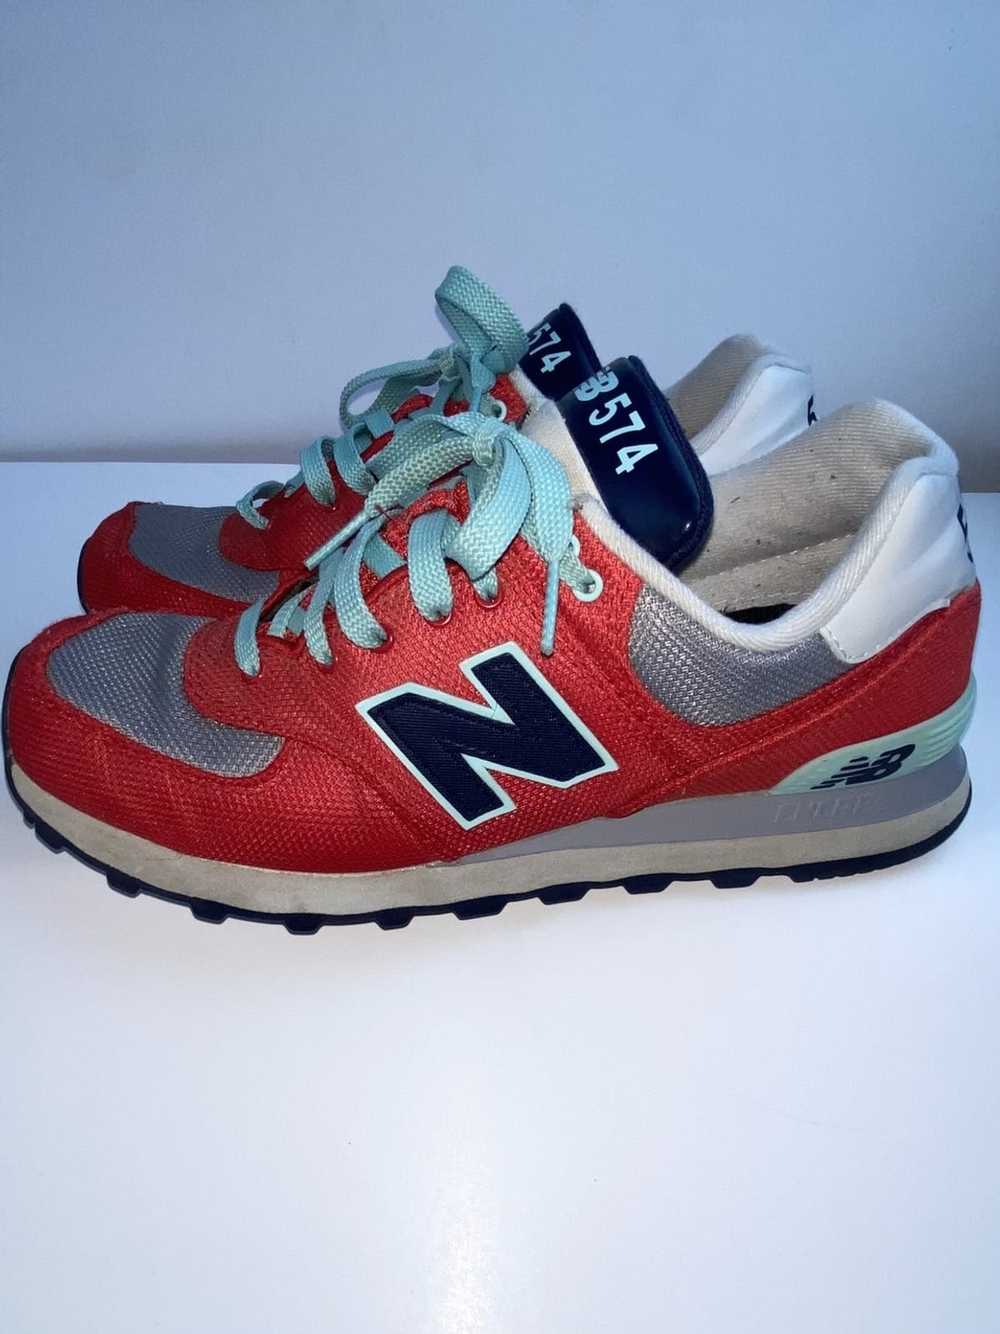 New Balance New Balance 574 Econ red teal shoes - image 11